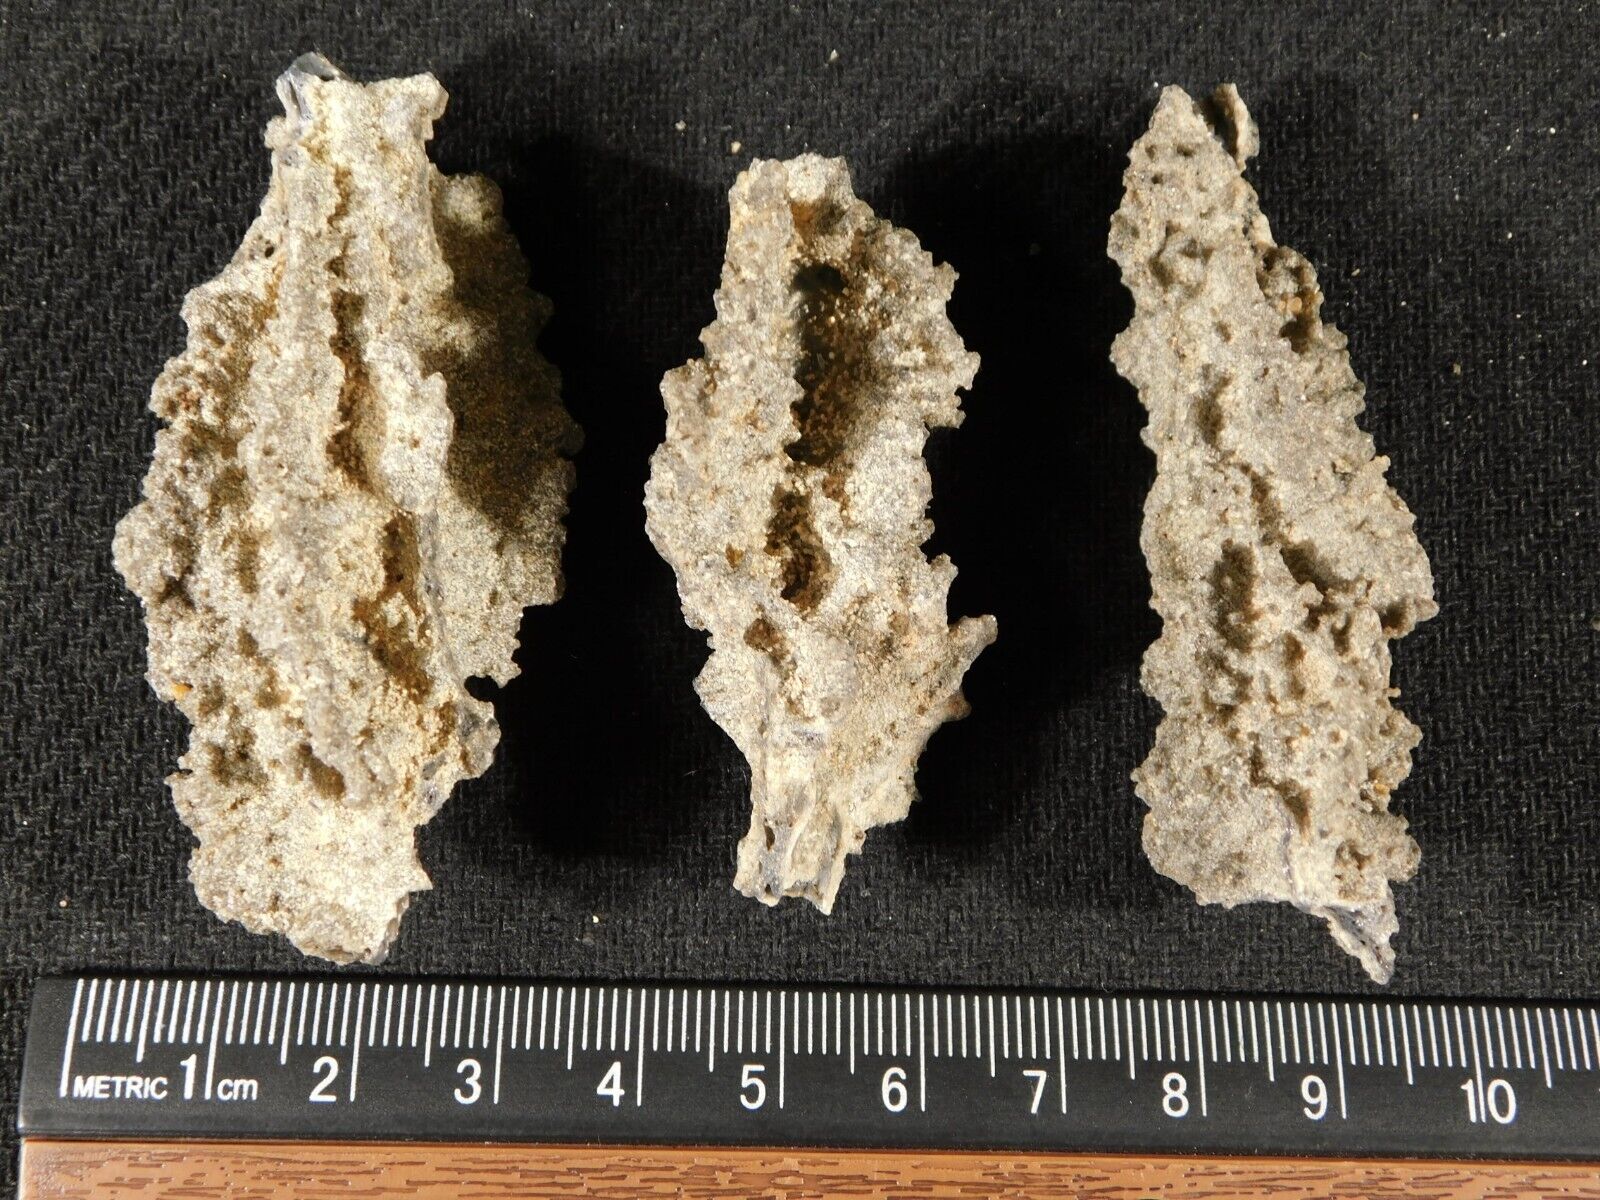 Lot of Three larger 100% Natural FULGURITE s or Petrified Lighting 13.0gr